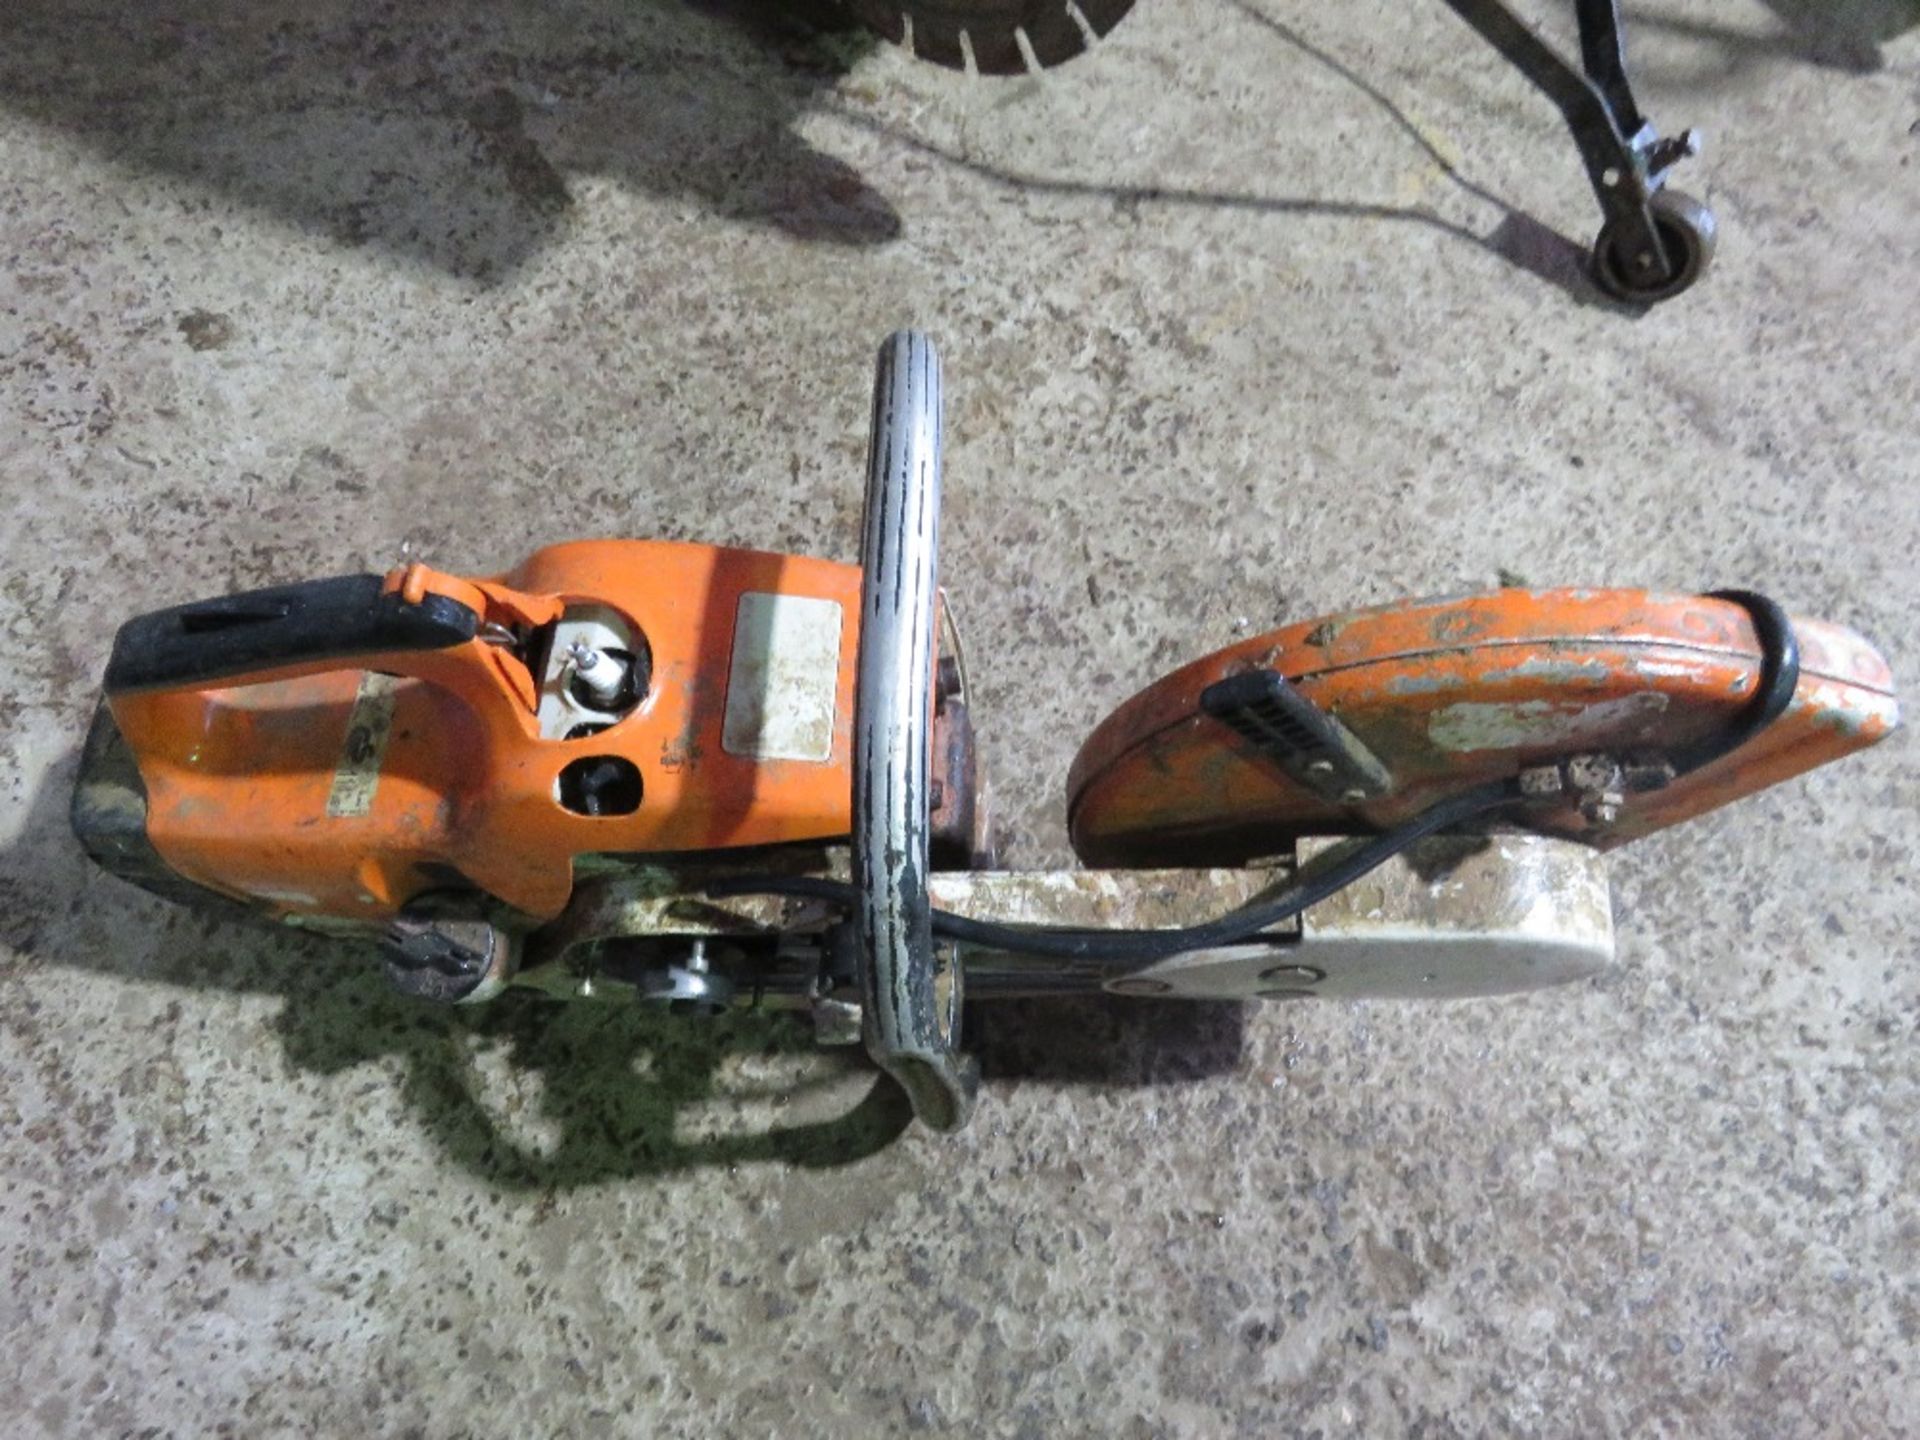 STIHL TS400 PETROL ENGINED CUT OFF SAW. THIS LOT IS SOLD UNDER THE AUCTIONEERS MARGIN SCHEME, THE - Image 2 of 2